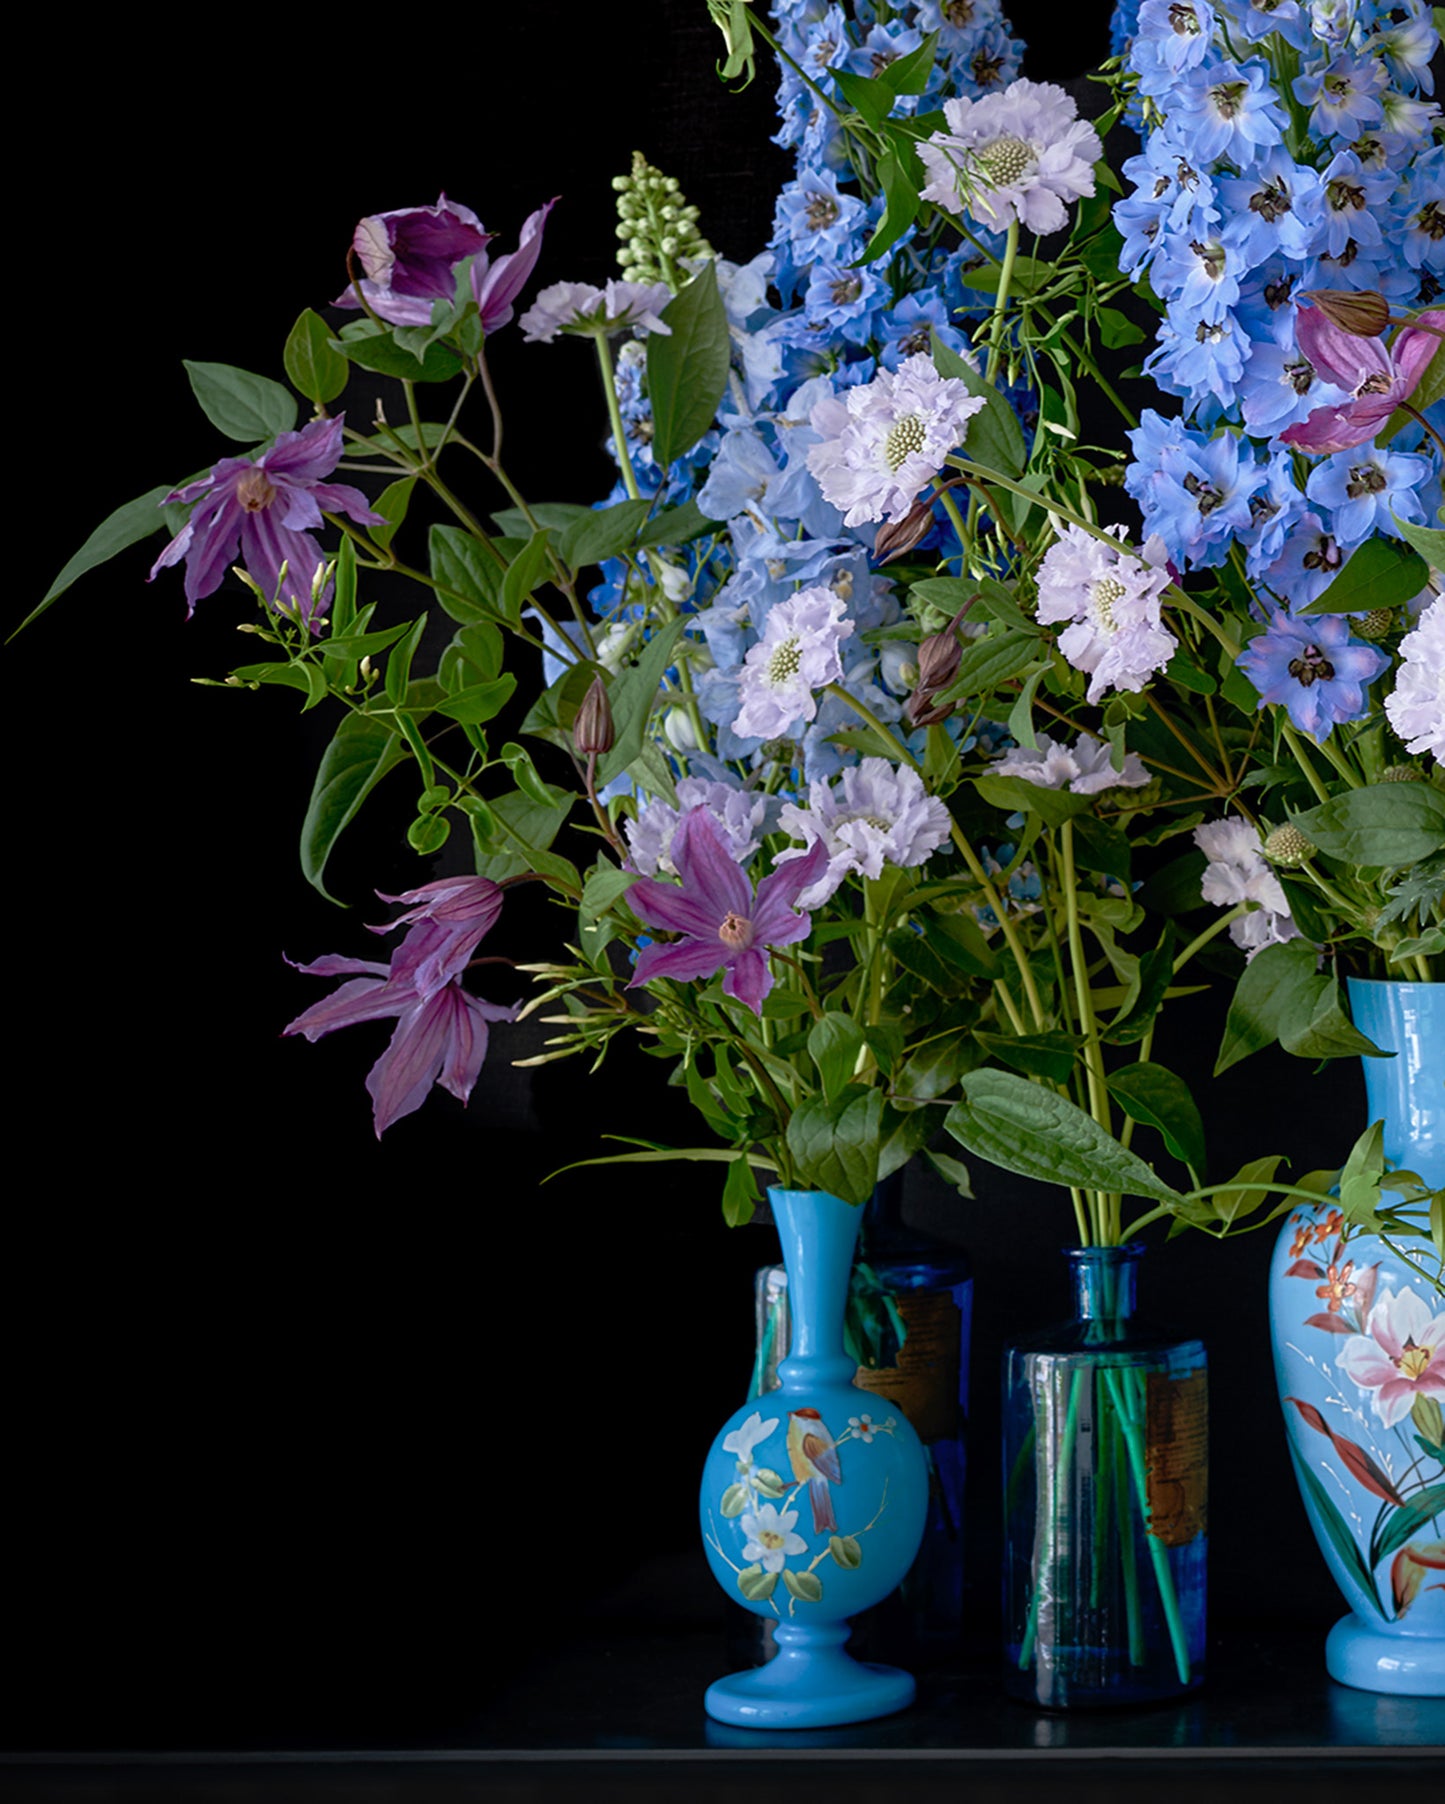 Detail of Limited Edition "Delphine" Fine Art Photographic Print, Purple & Blue Flower Arrangement in Hand Painted Vases on Black Background